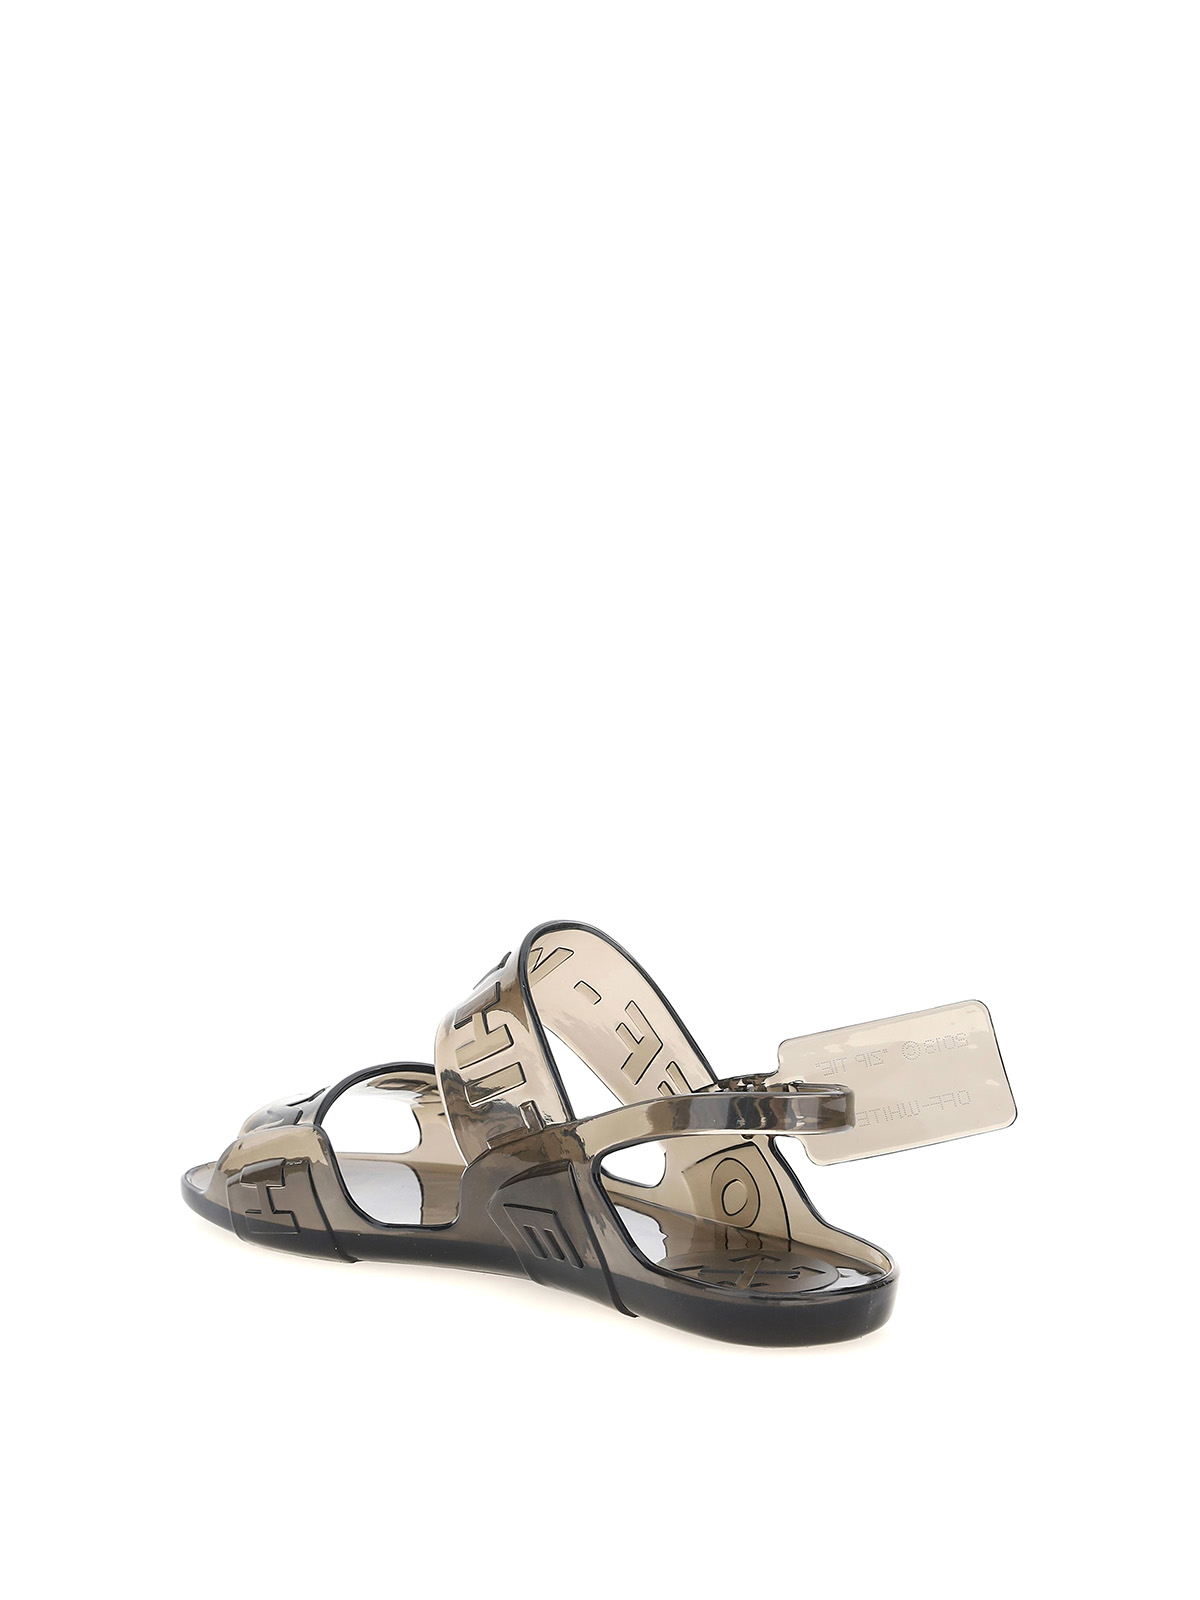 jelly sandals off white